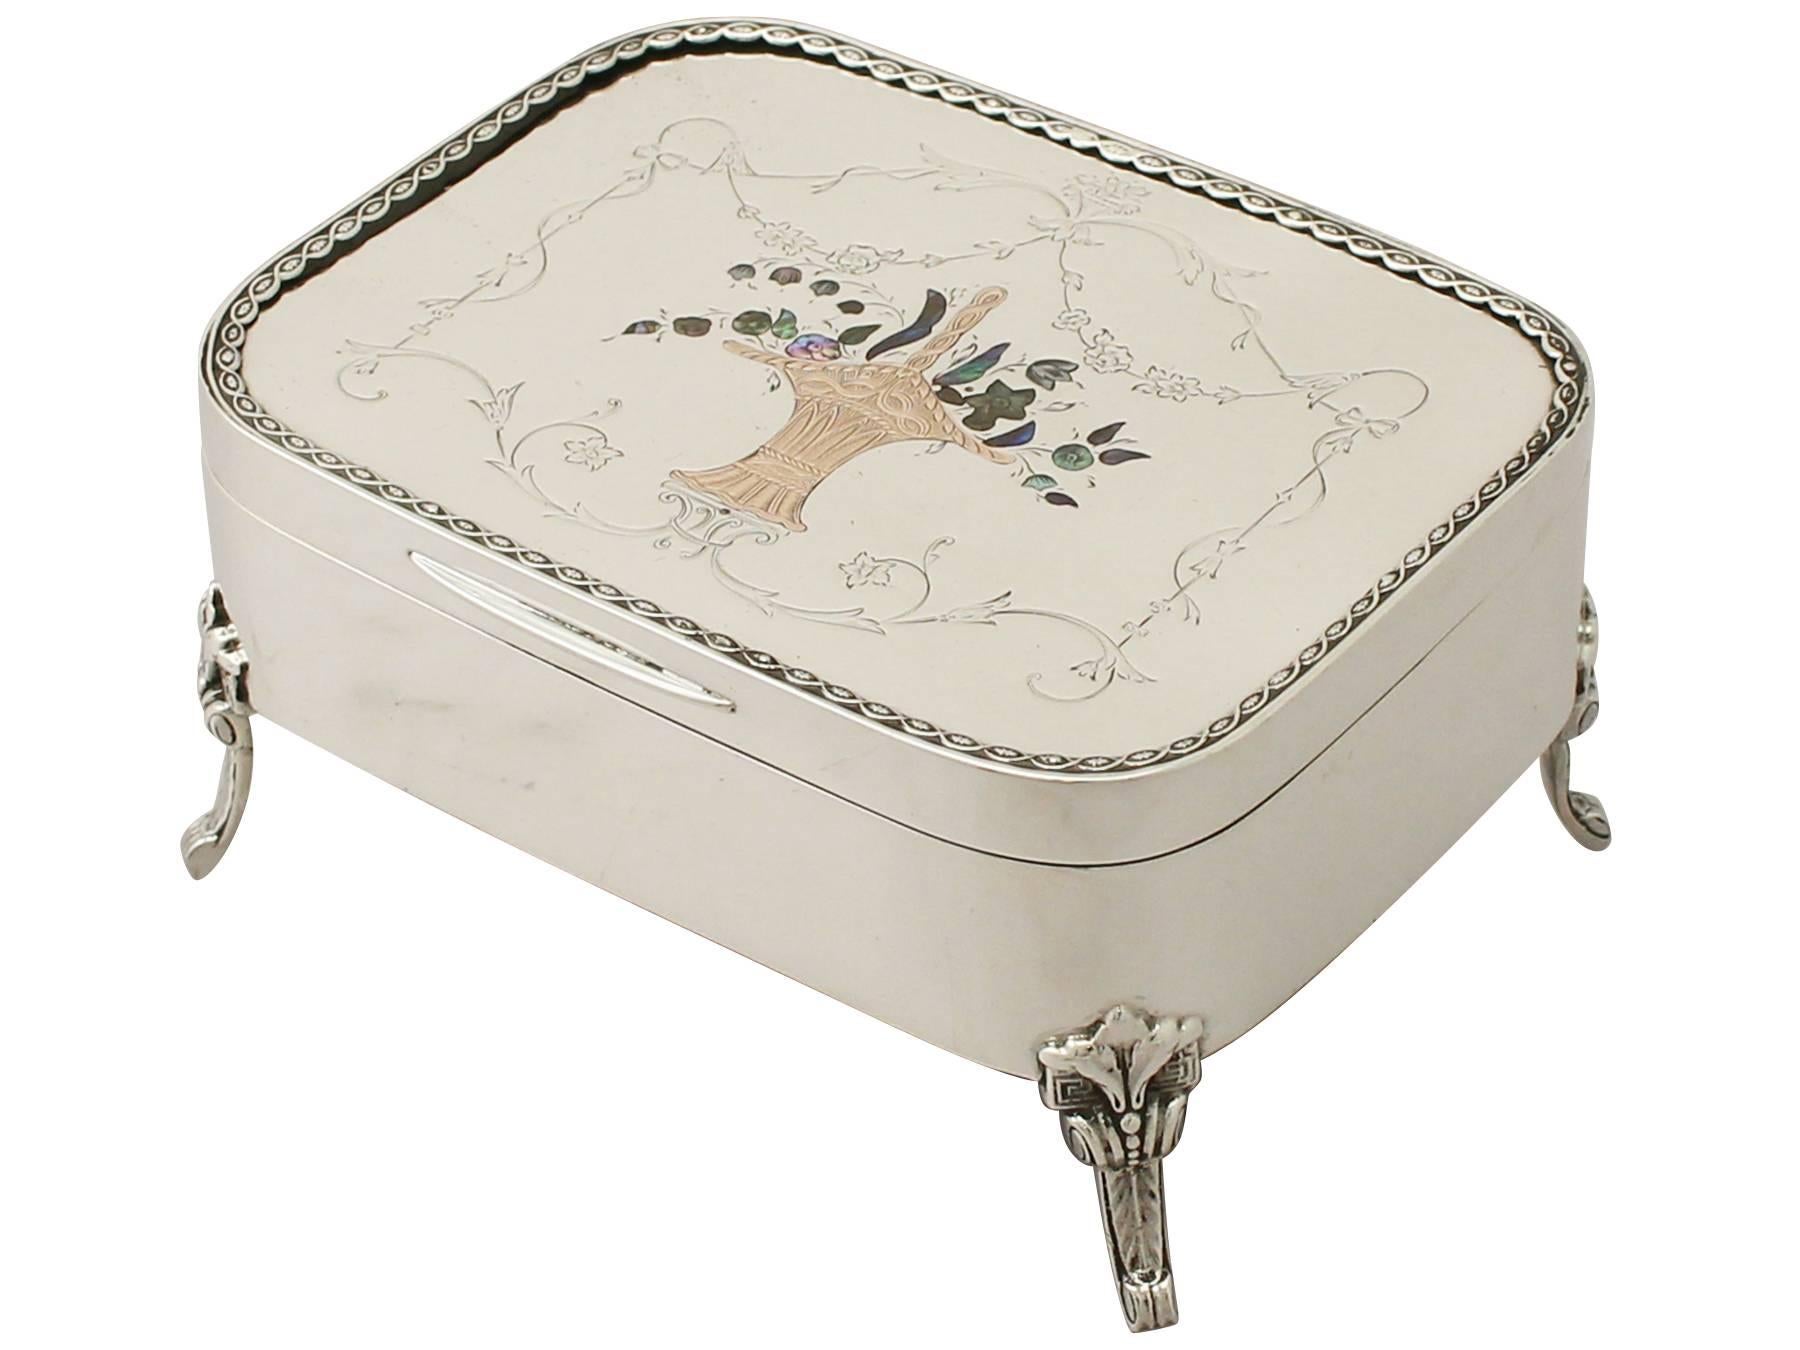 English Sterling Silver Jewelry Box - Antique Edwardian